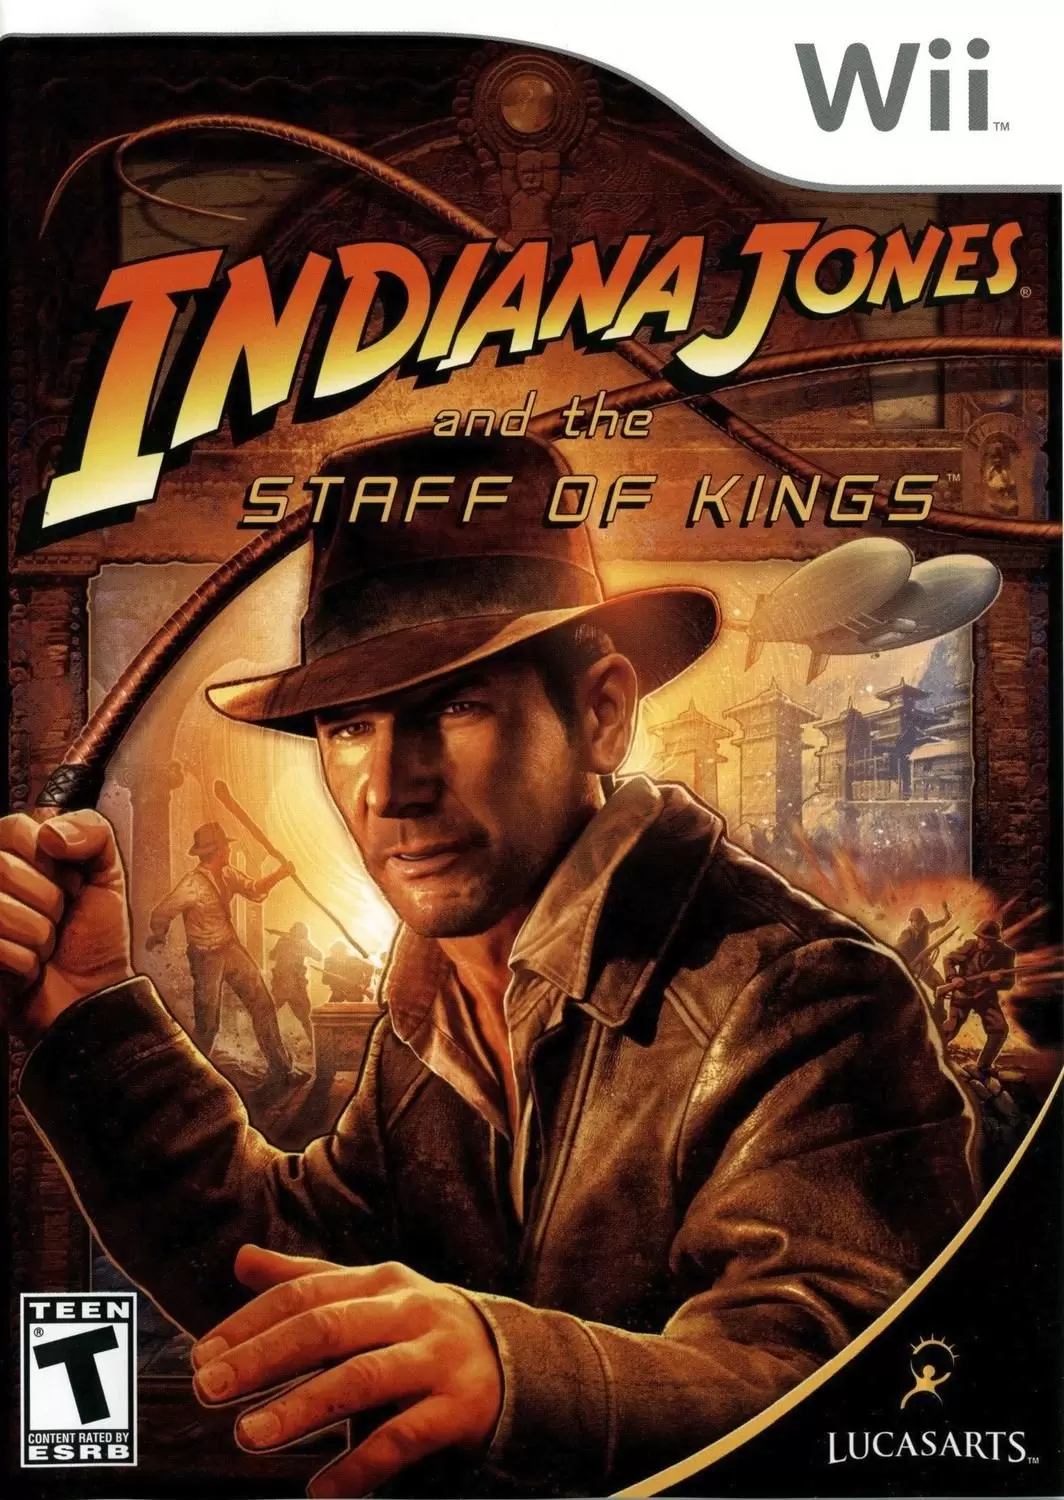 Nintendo Wii Games - Indiana Jones and the Staff of Kings